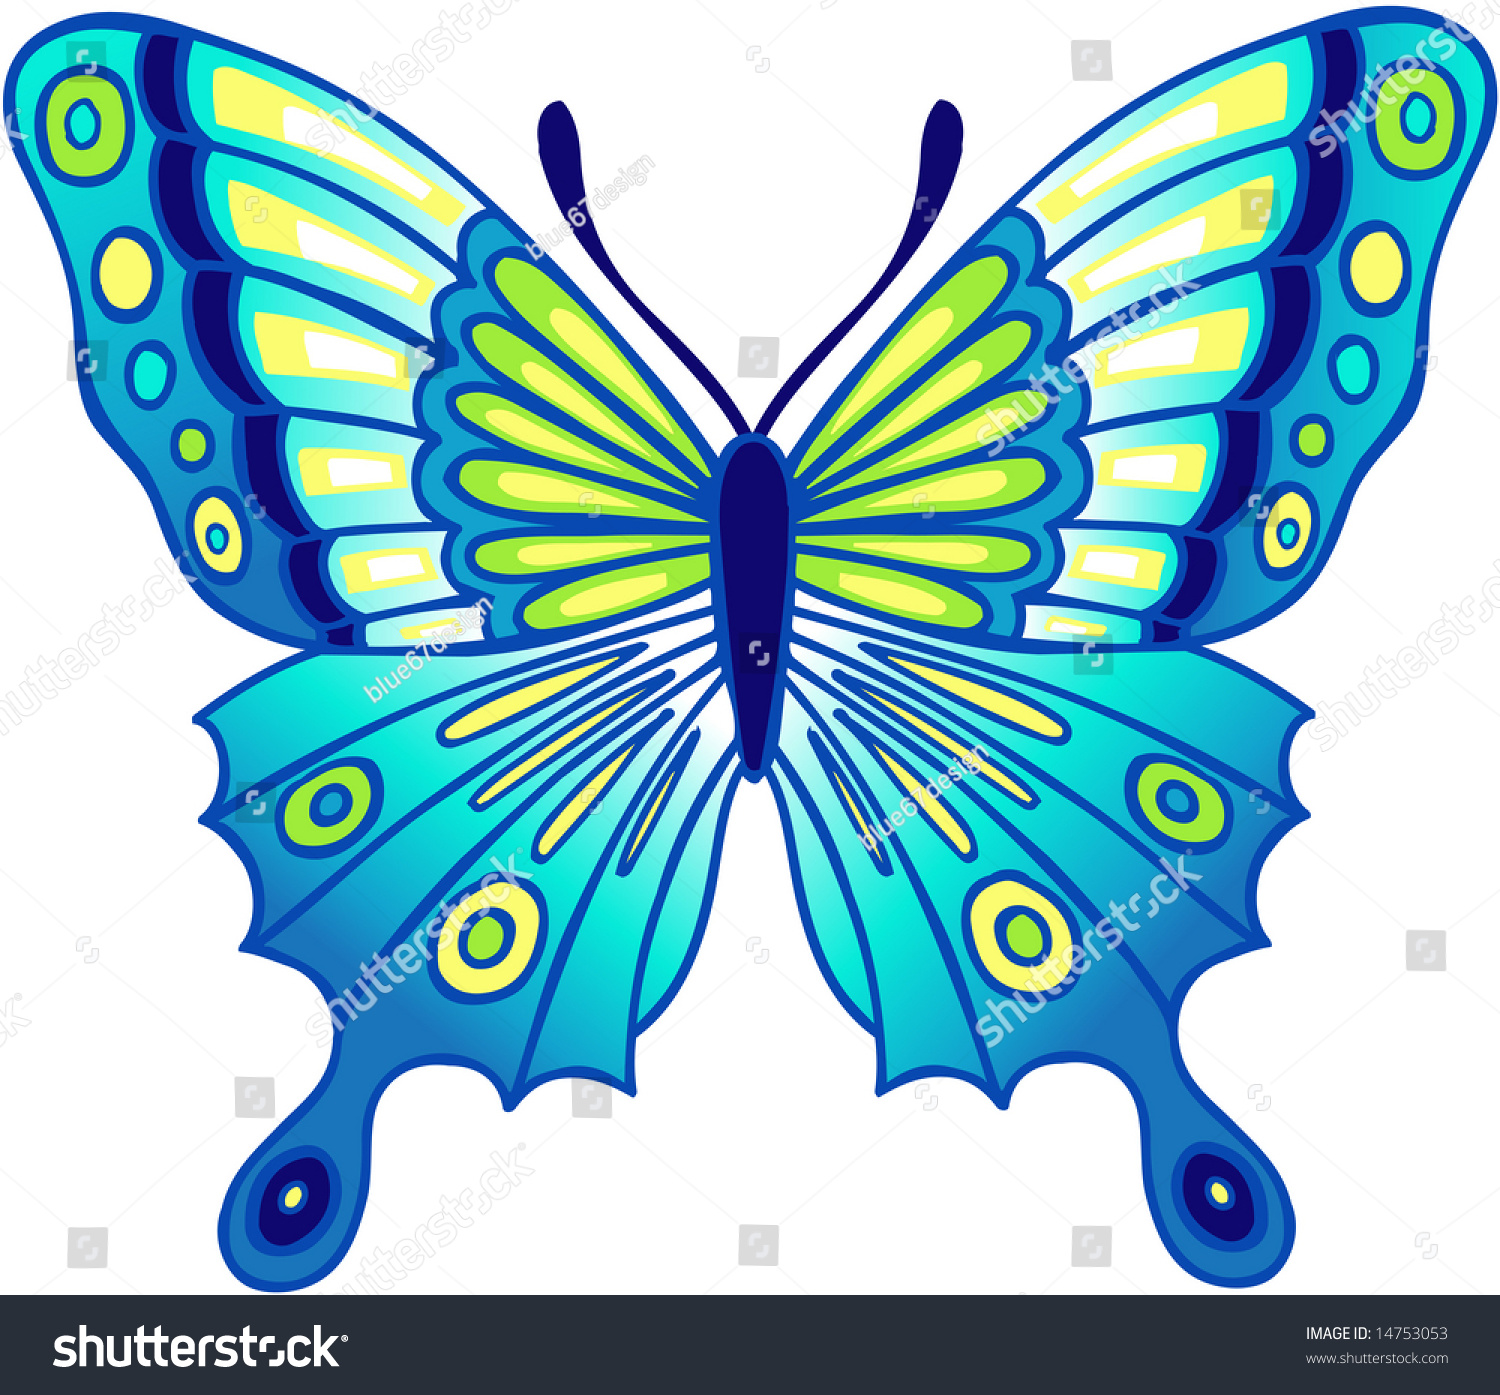 Download Blue Monarch Butterfly Vector Illustration Stock Vector ...